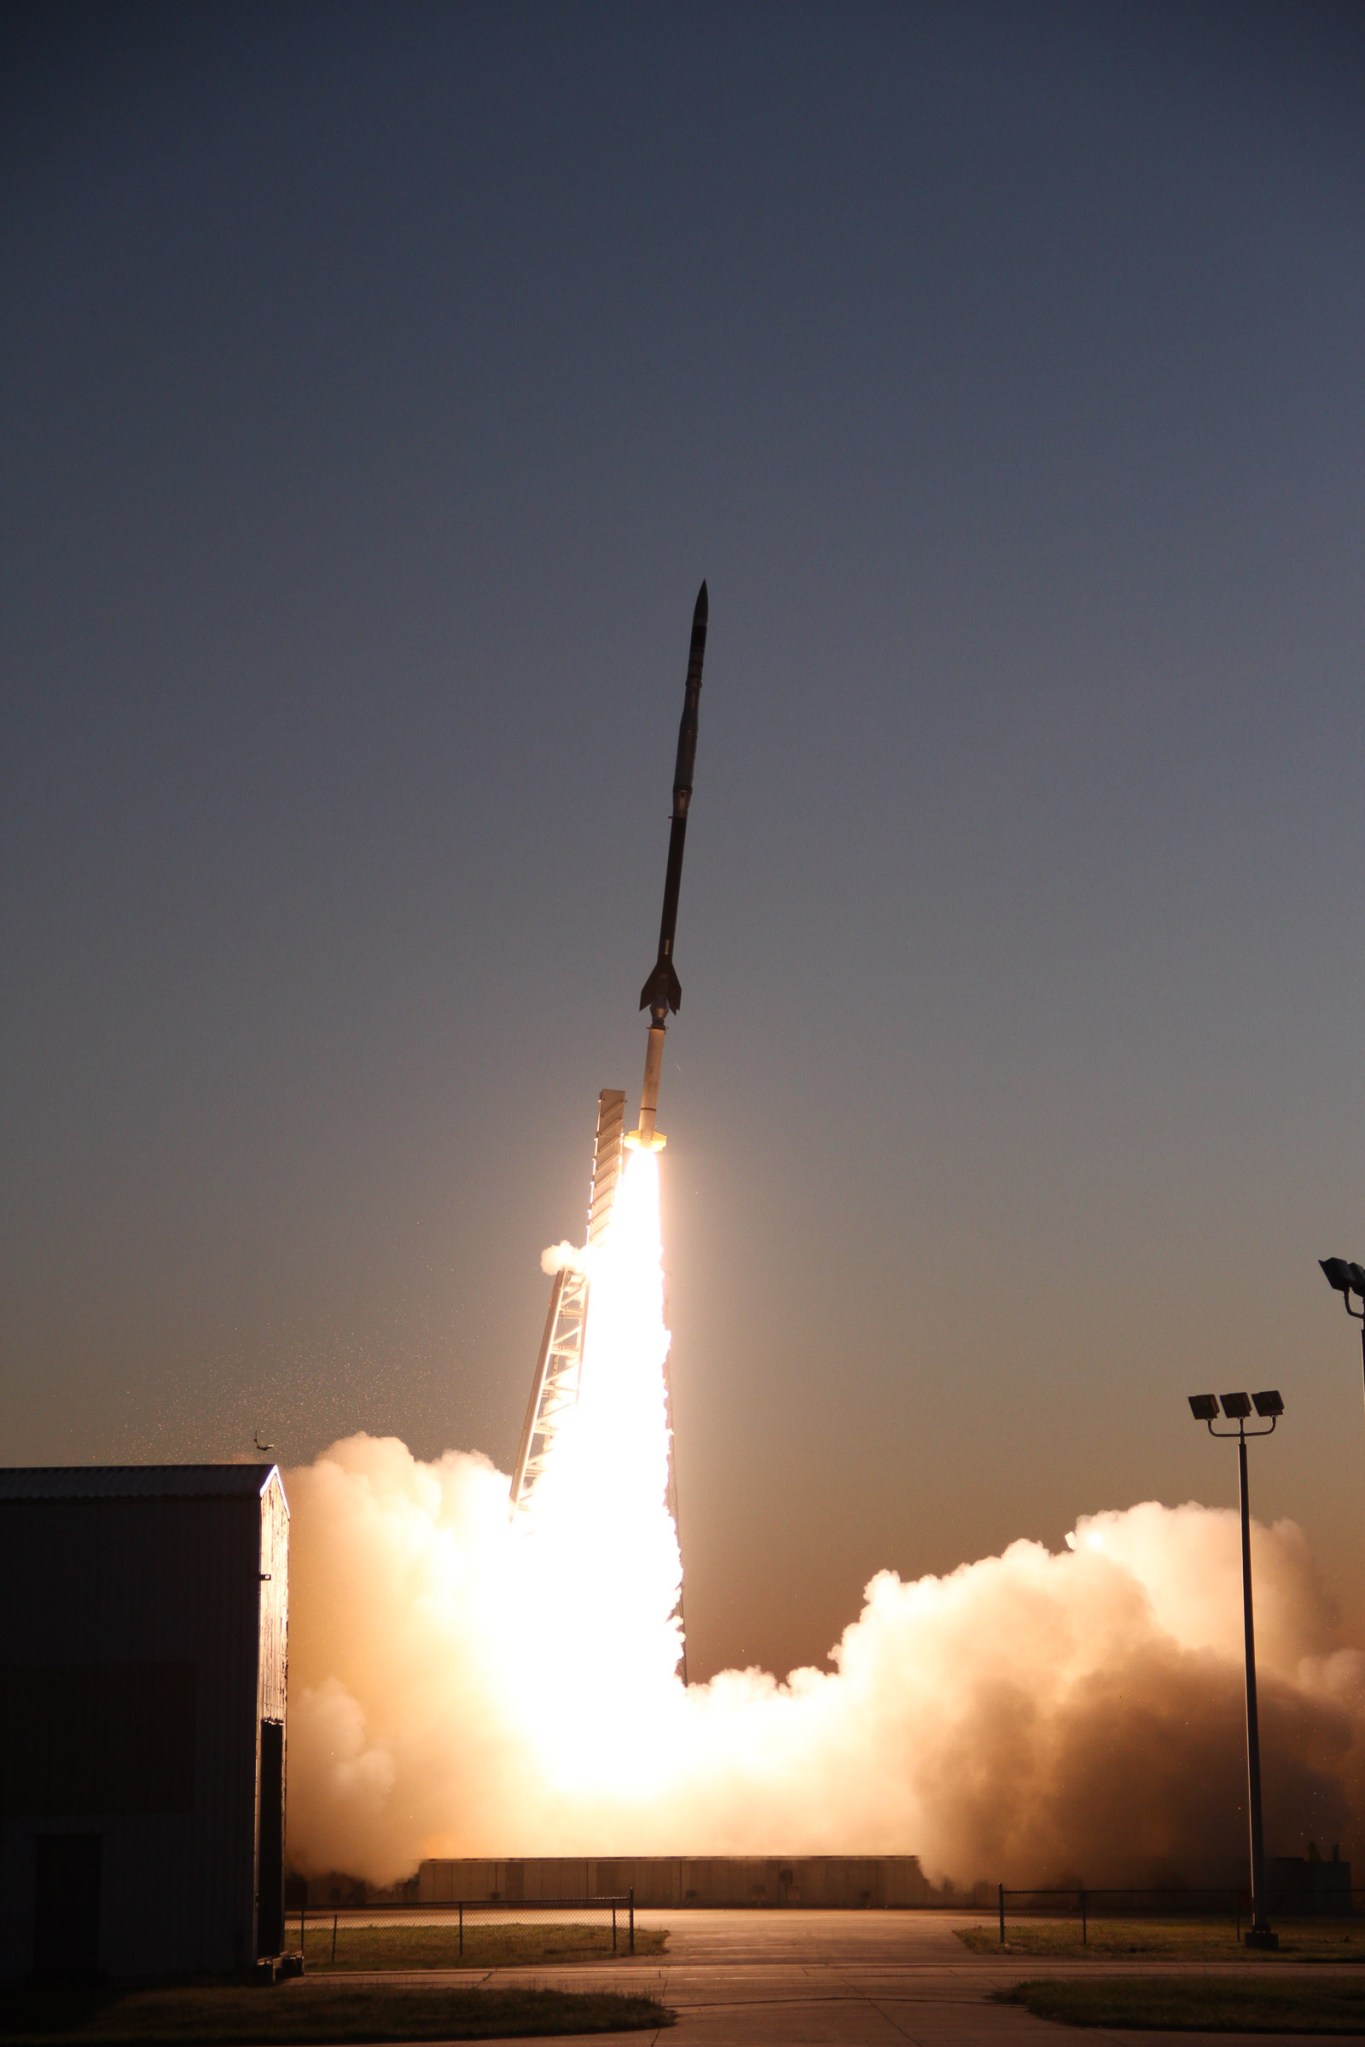 A sounding rocket seconds in mid-launch off the launch pad with a bright white plume the spreads out underneath the rocket when it hits the ground. The rocket is white on the bottom and darker up to the top.